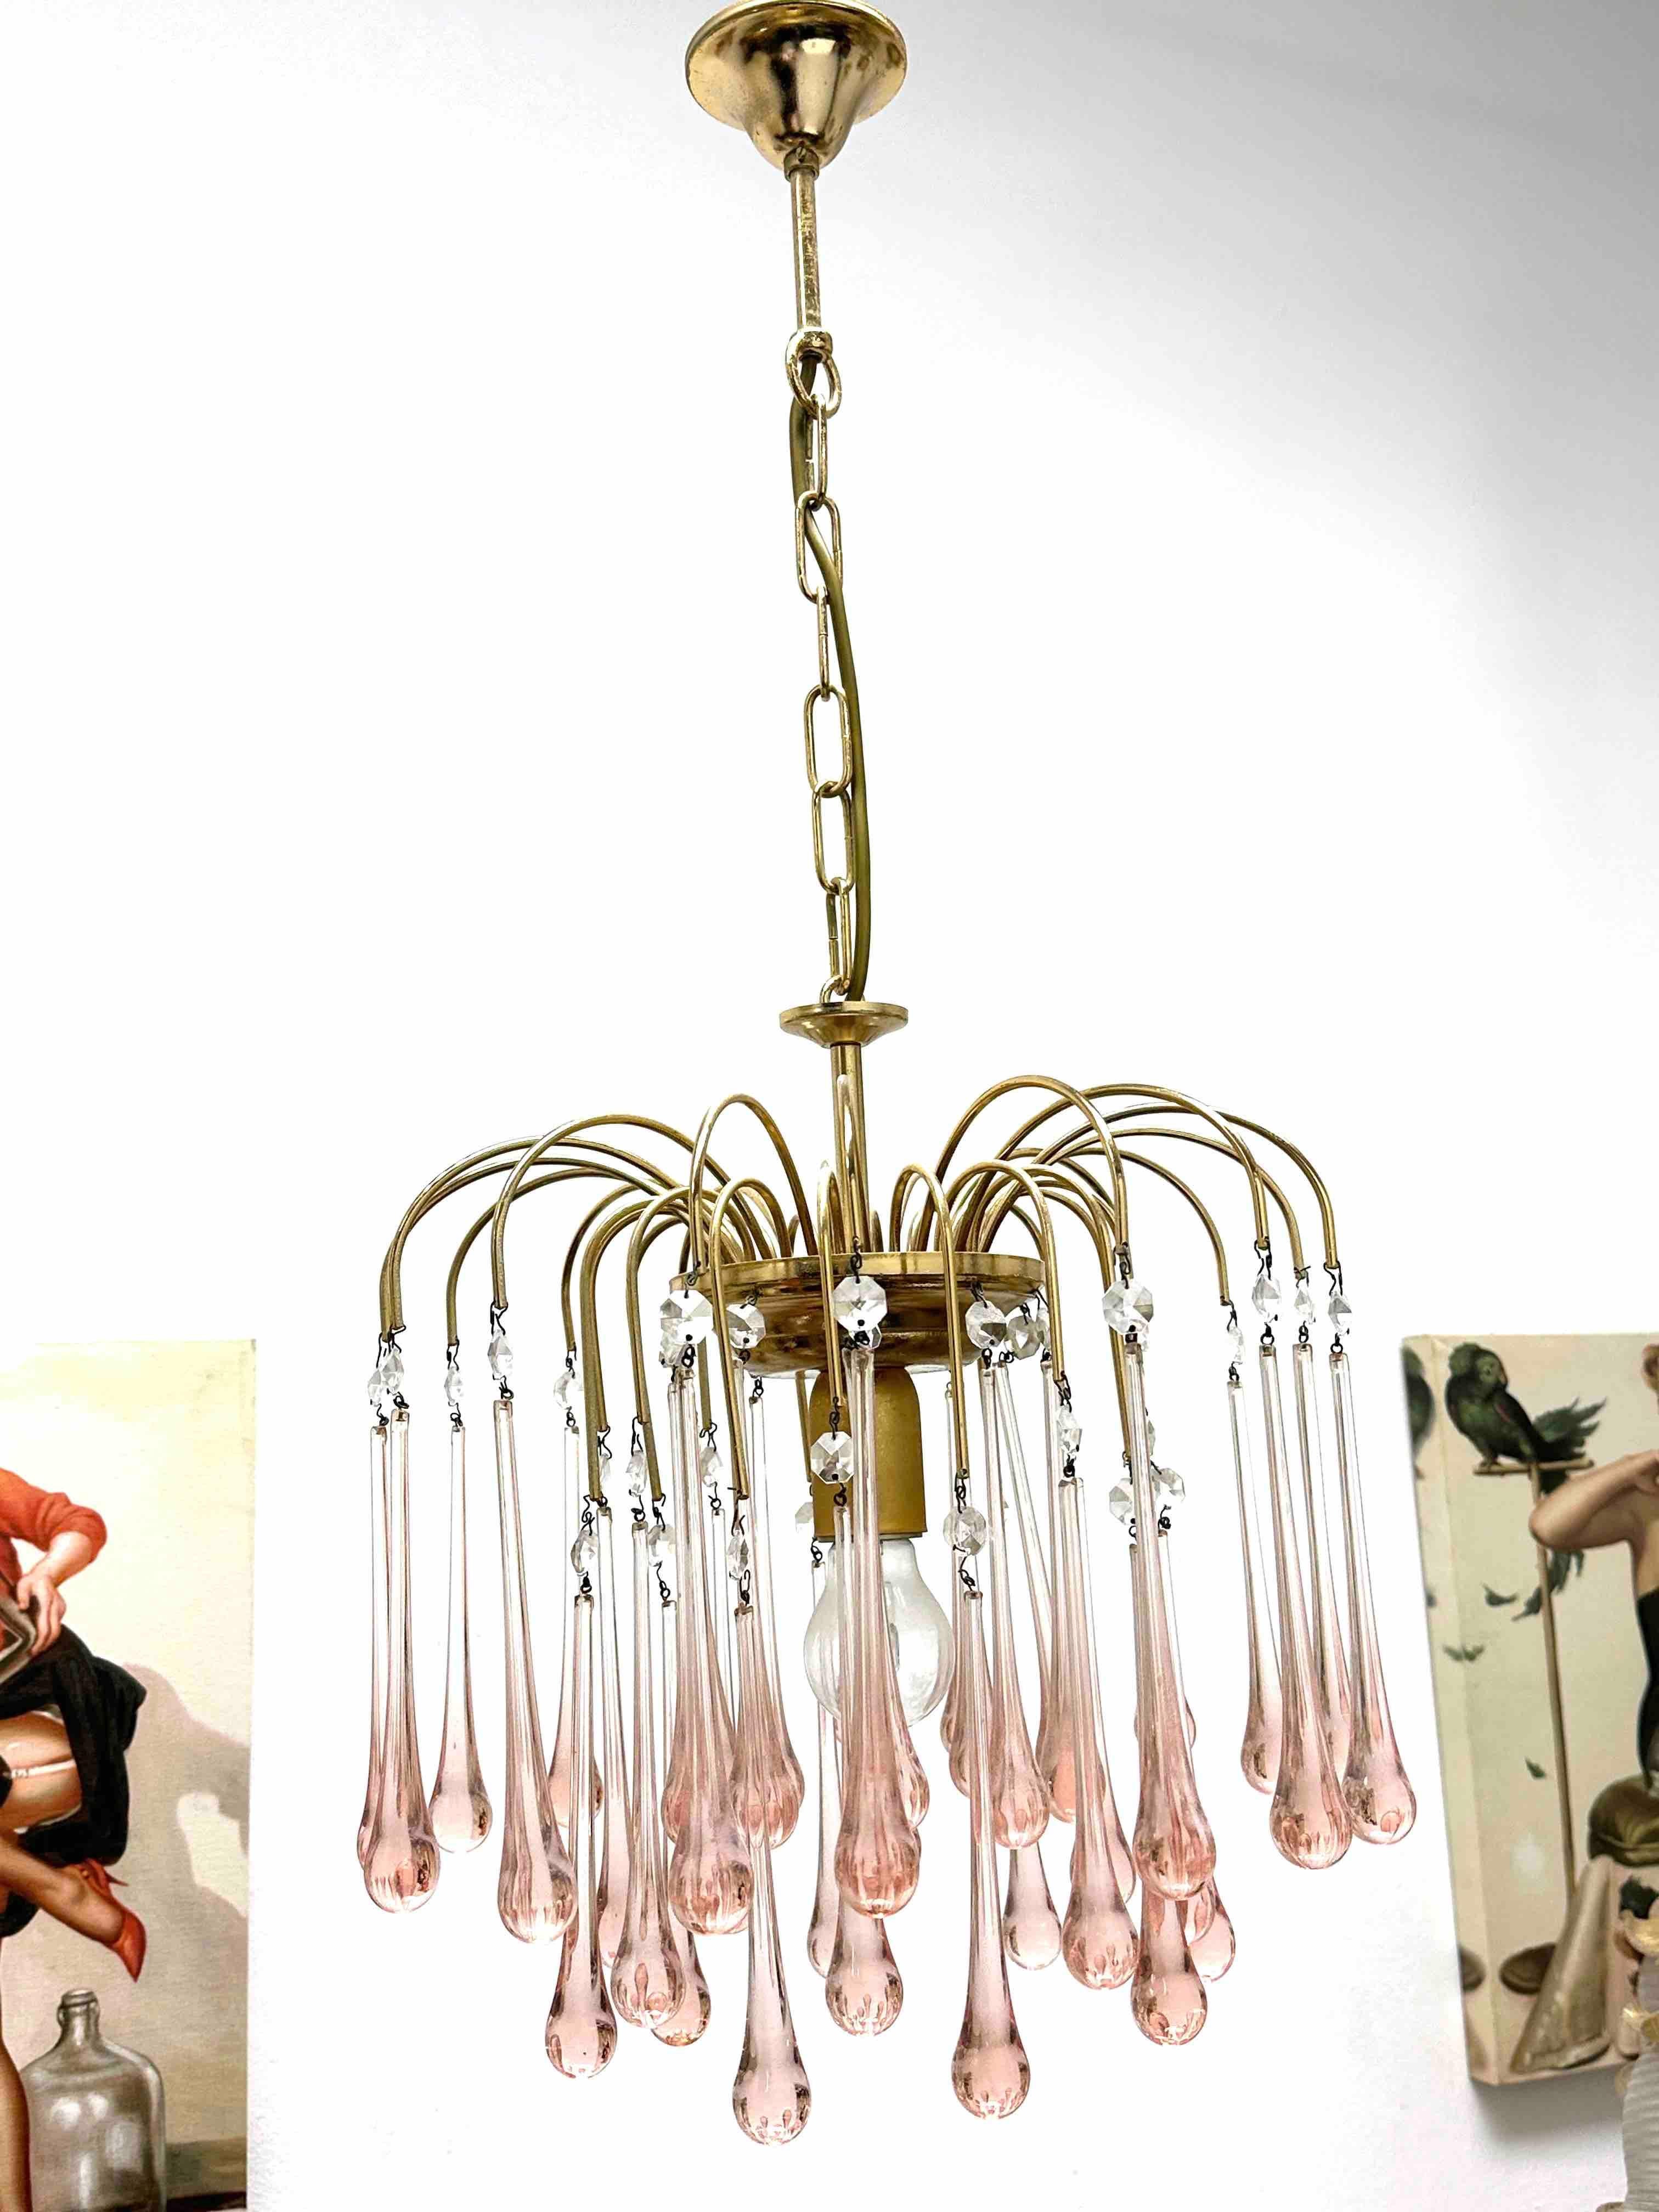 Stunning crystal waterfall chandelier. The piece is made of brass and detailed with three layers of pink crystal glass teardrops. This will make a beautiful addition to your Vanity room or probably bedroom. Your item will be carefully packed.